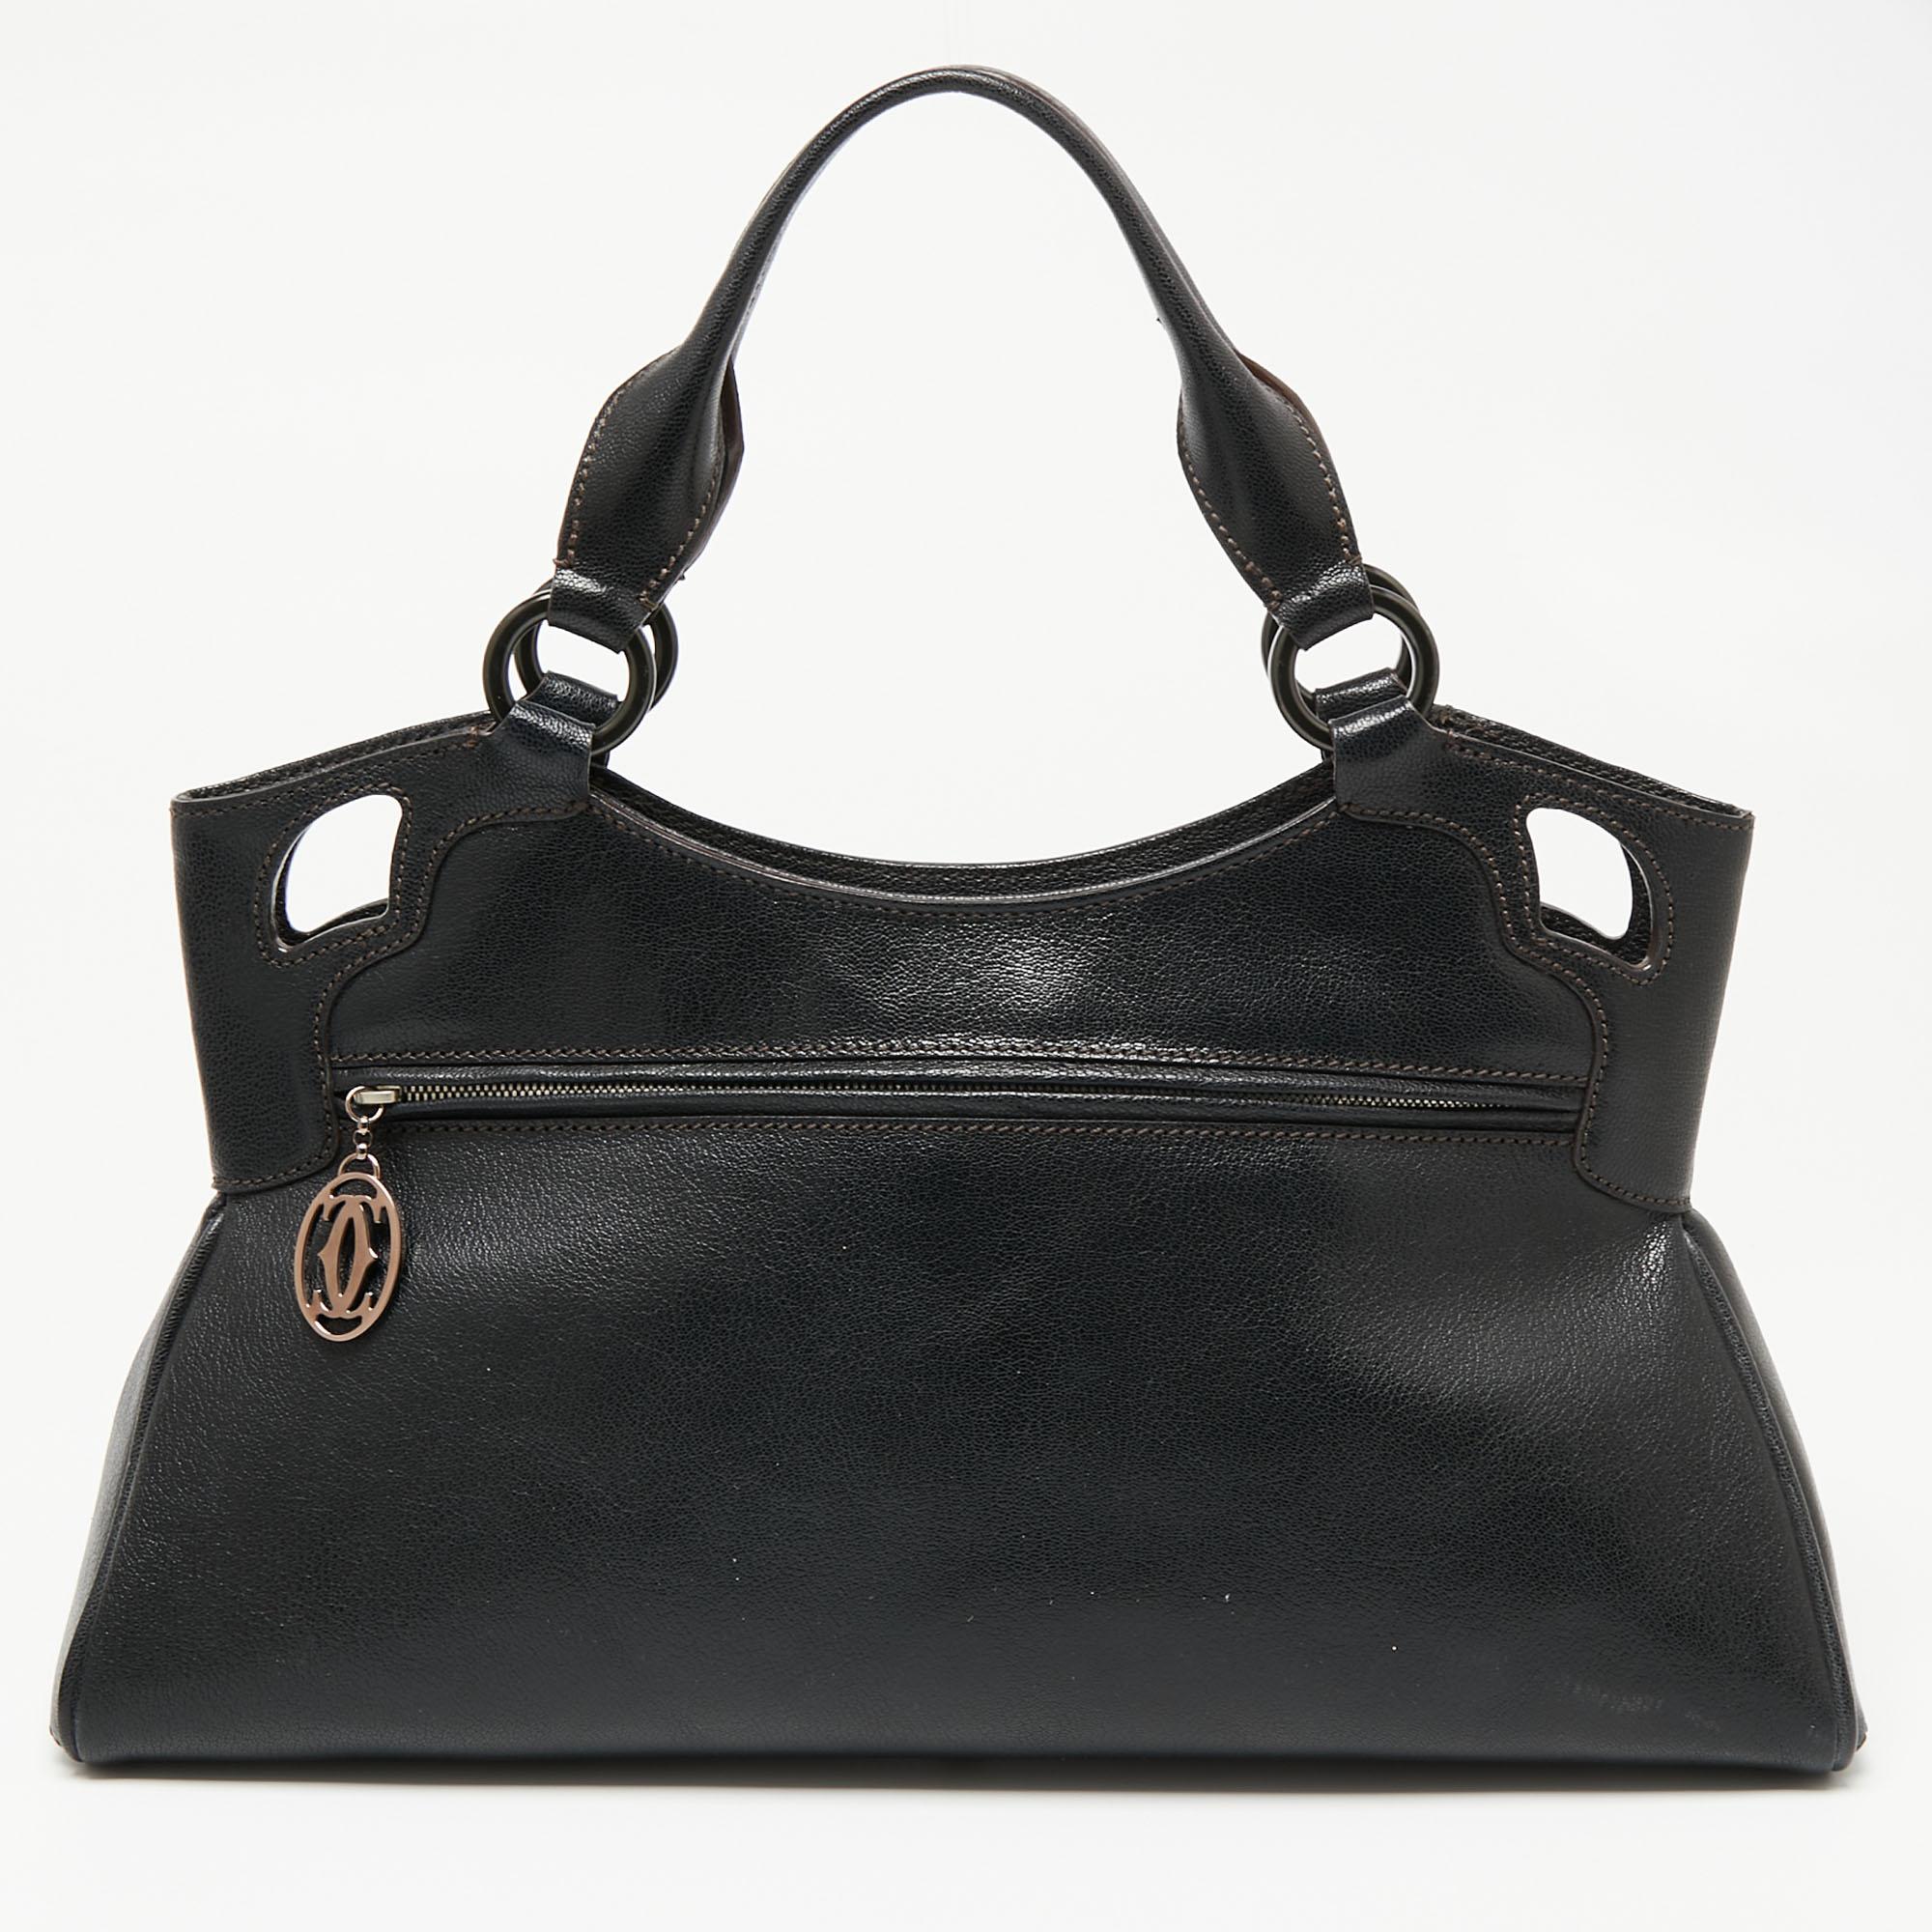 This Cartier beauty arrives in a gorgeous shape and design. It has a black leather body with the logo detailing on the exterior and is held by two handles. The zipper secures the fabric interior and overall, the bag looks ready to lift your classic